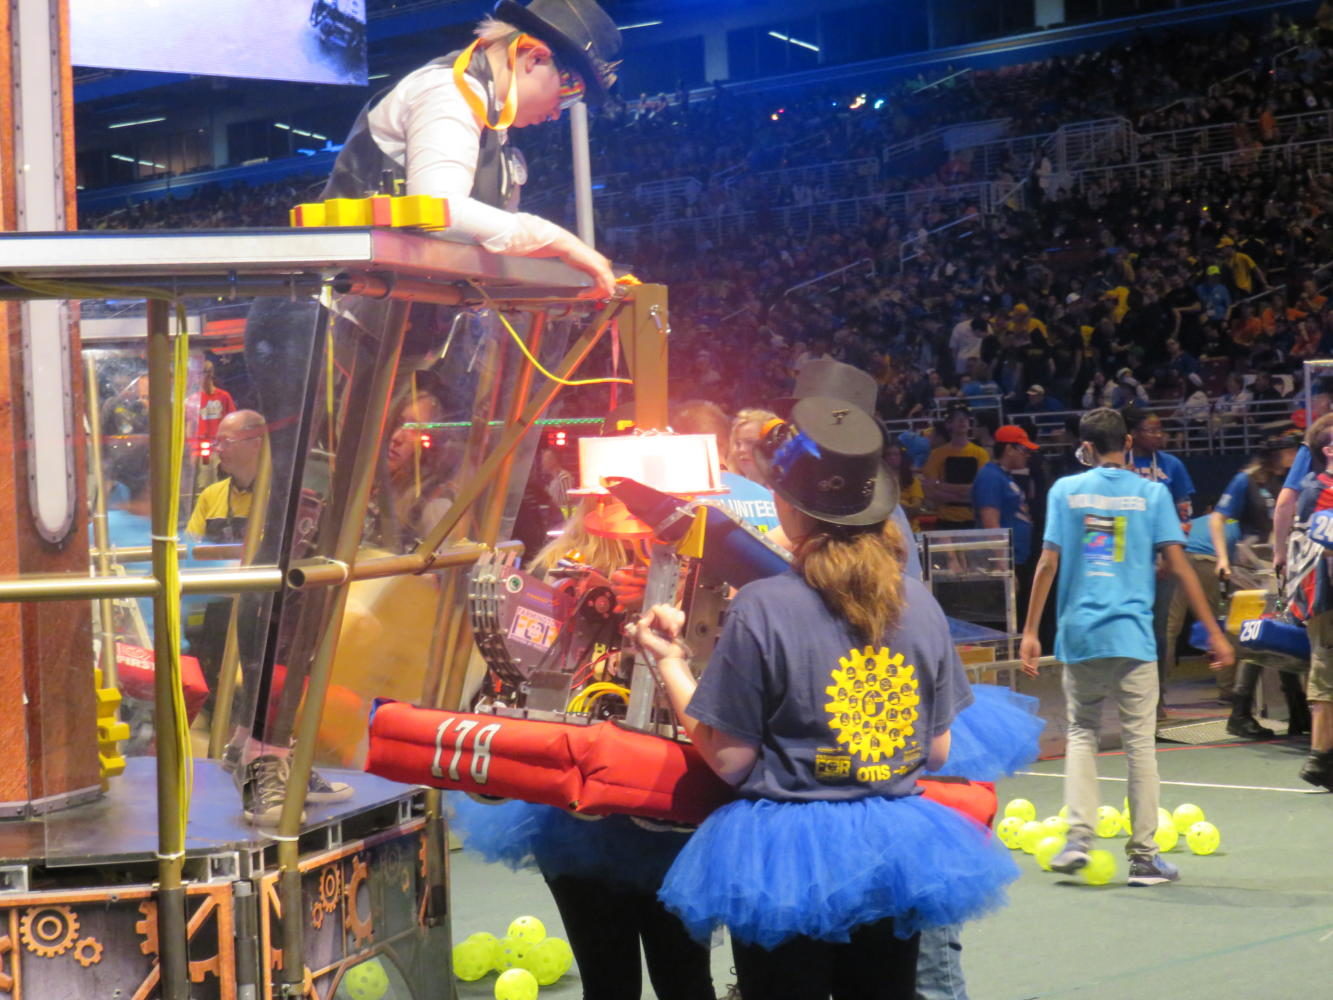 Zooming around -- Team 178, The Second Law Enforcers, robot, Gearzmo, hits a hopper dropping 100 balls onto the field which can be collected and shot inside of a low and high goal. The team ranked an overall 35 out of 68 with seven wins and three losses after the three day event.